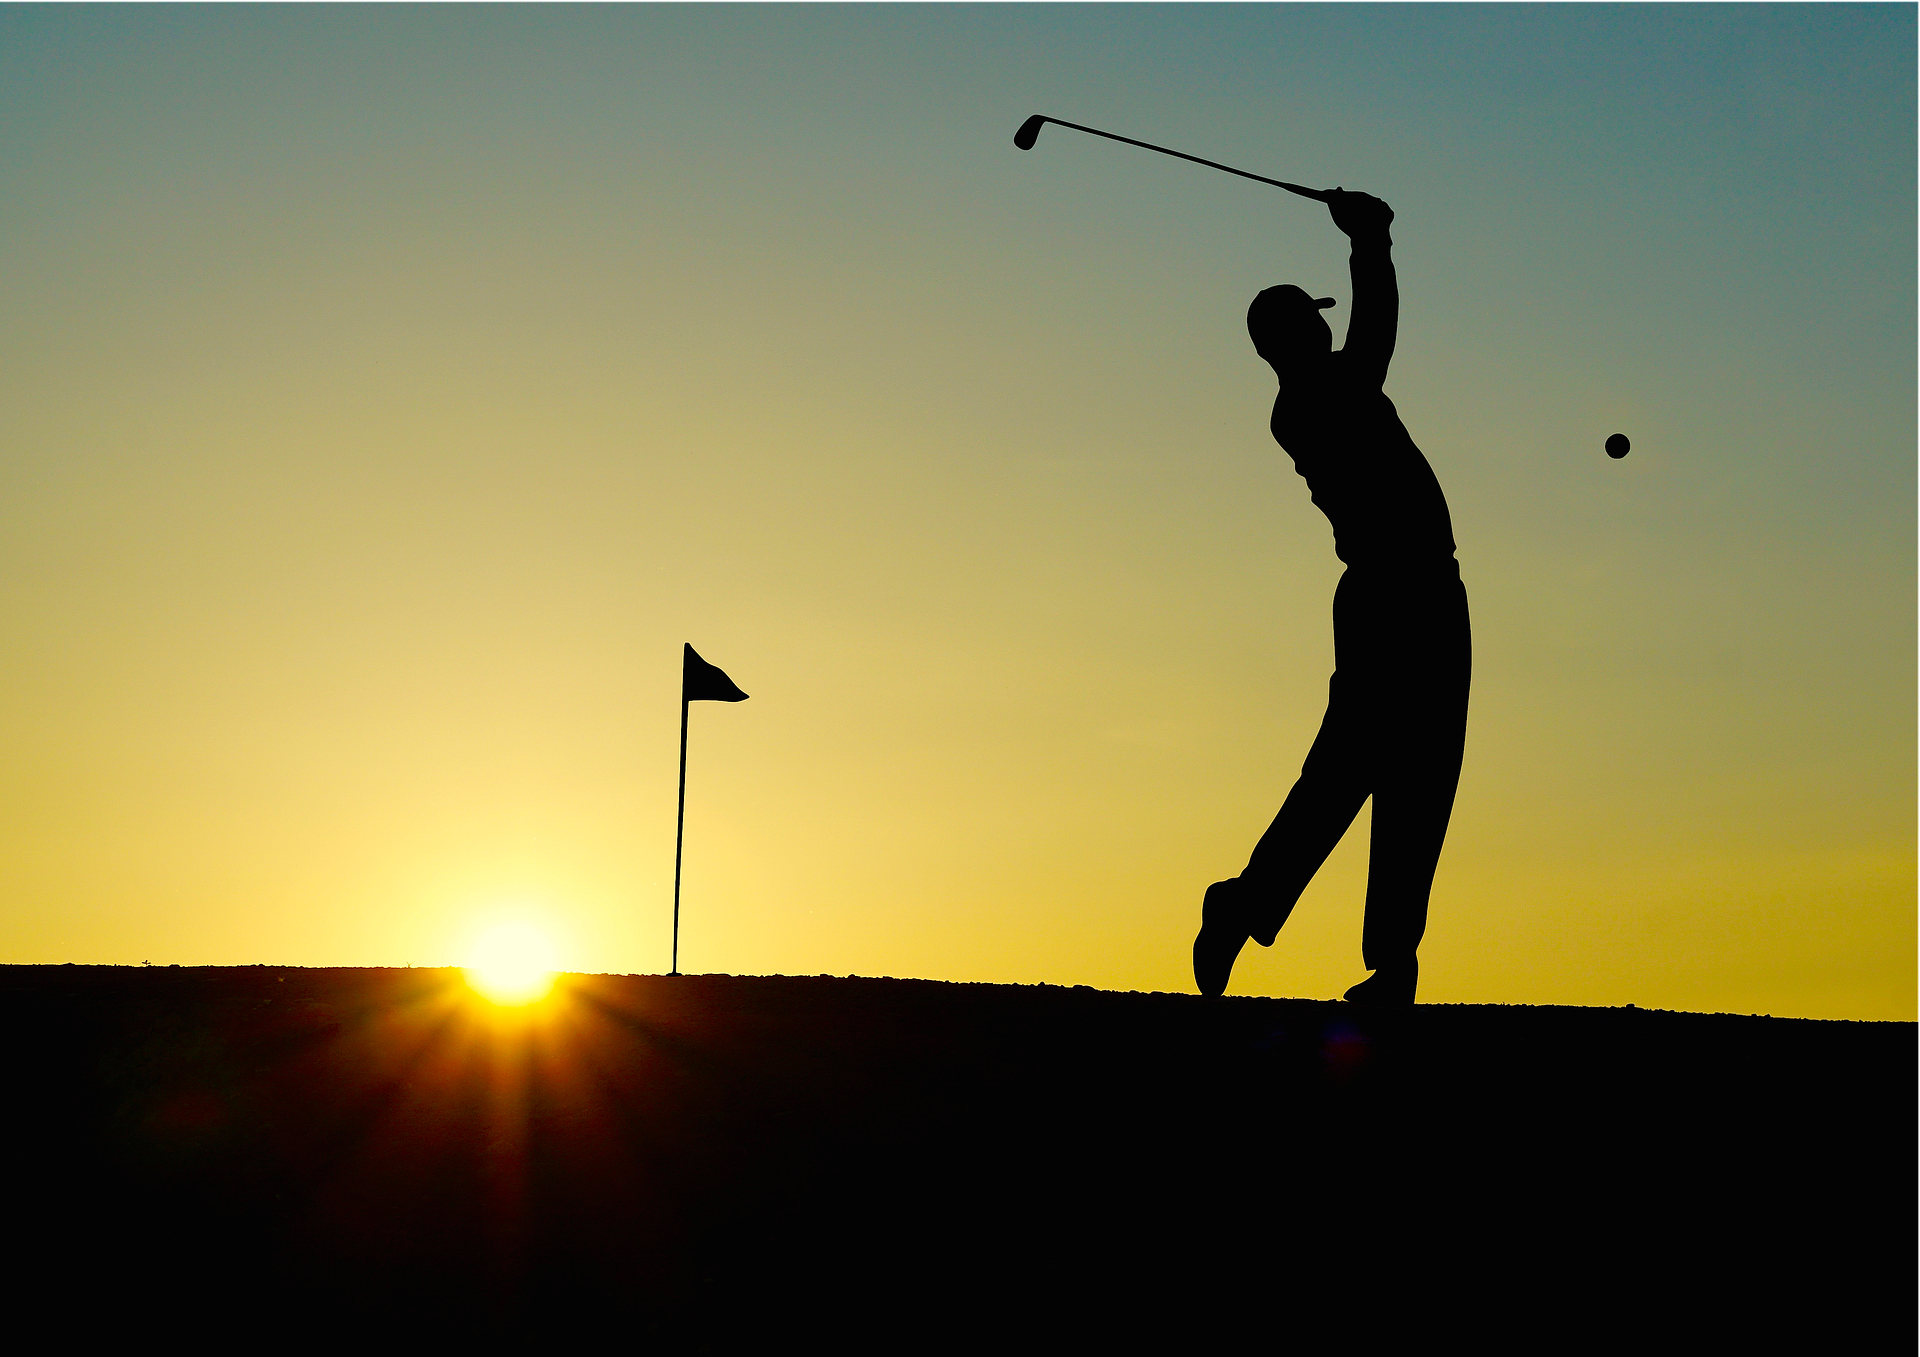 A silhouette of a golfer taking a swing